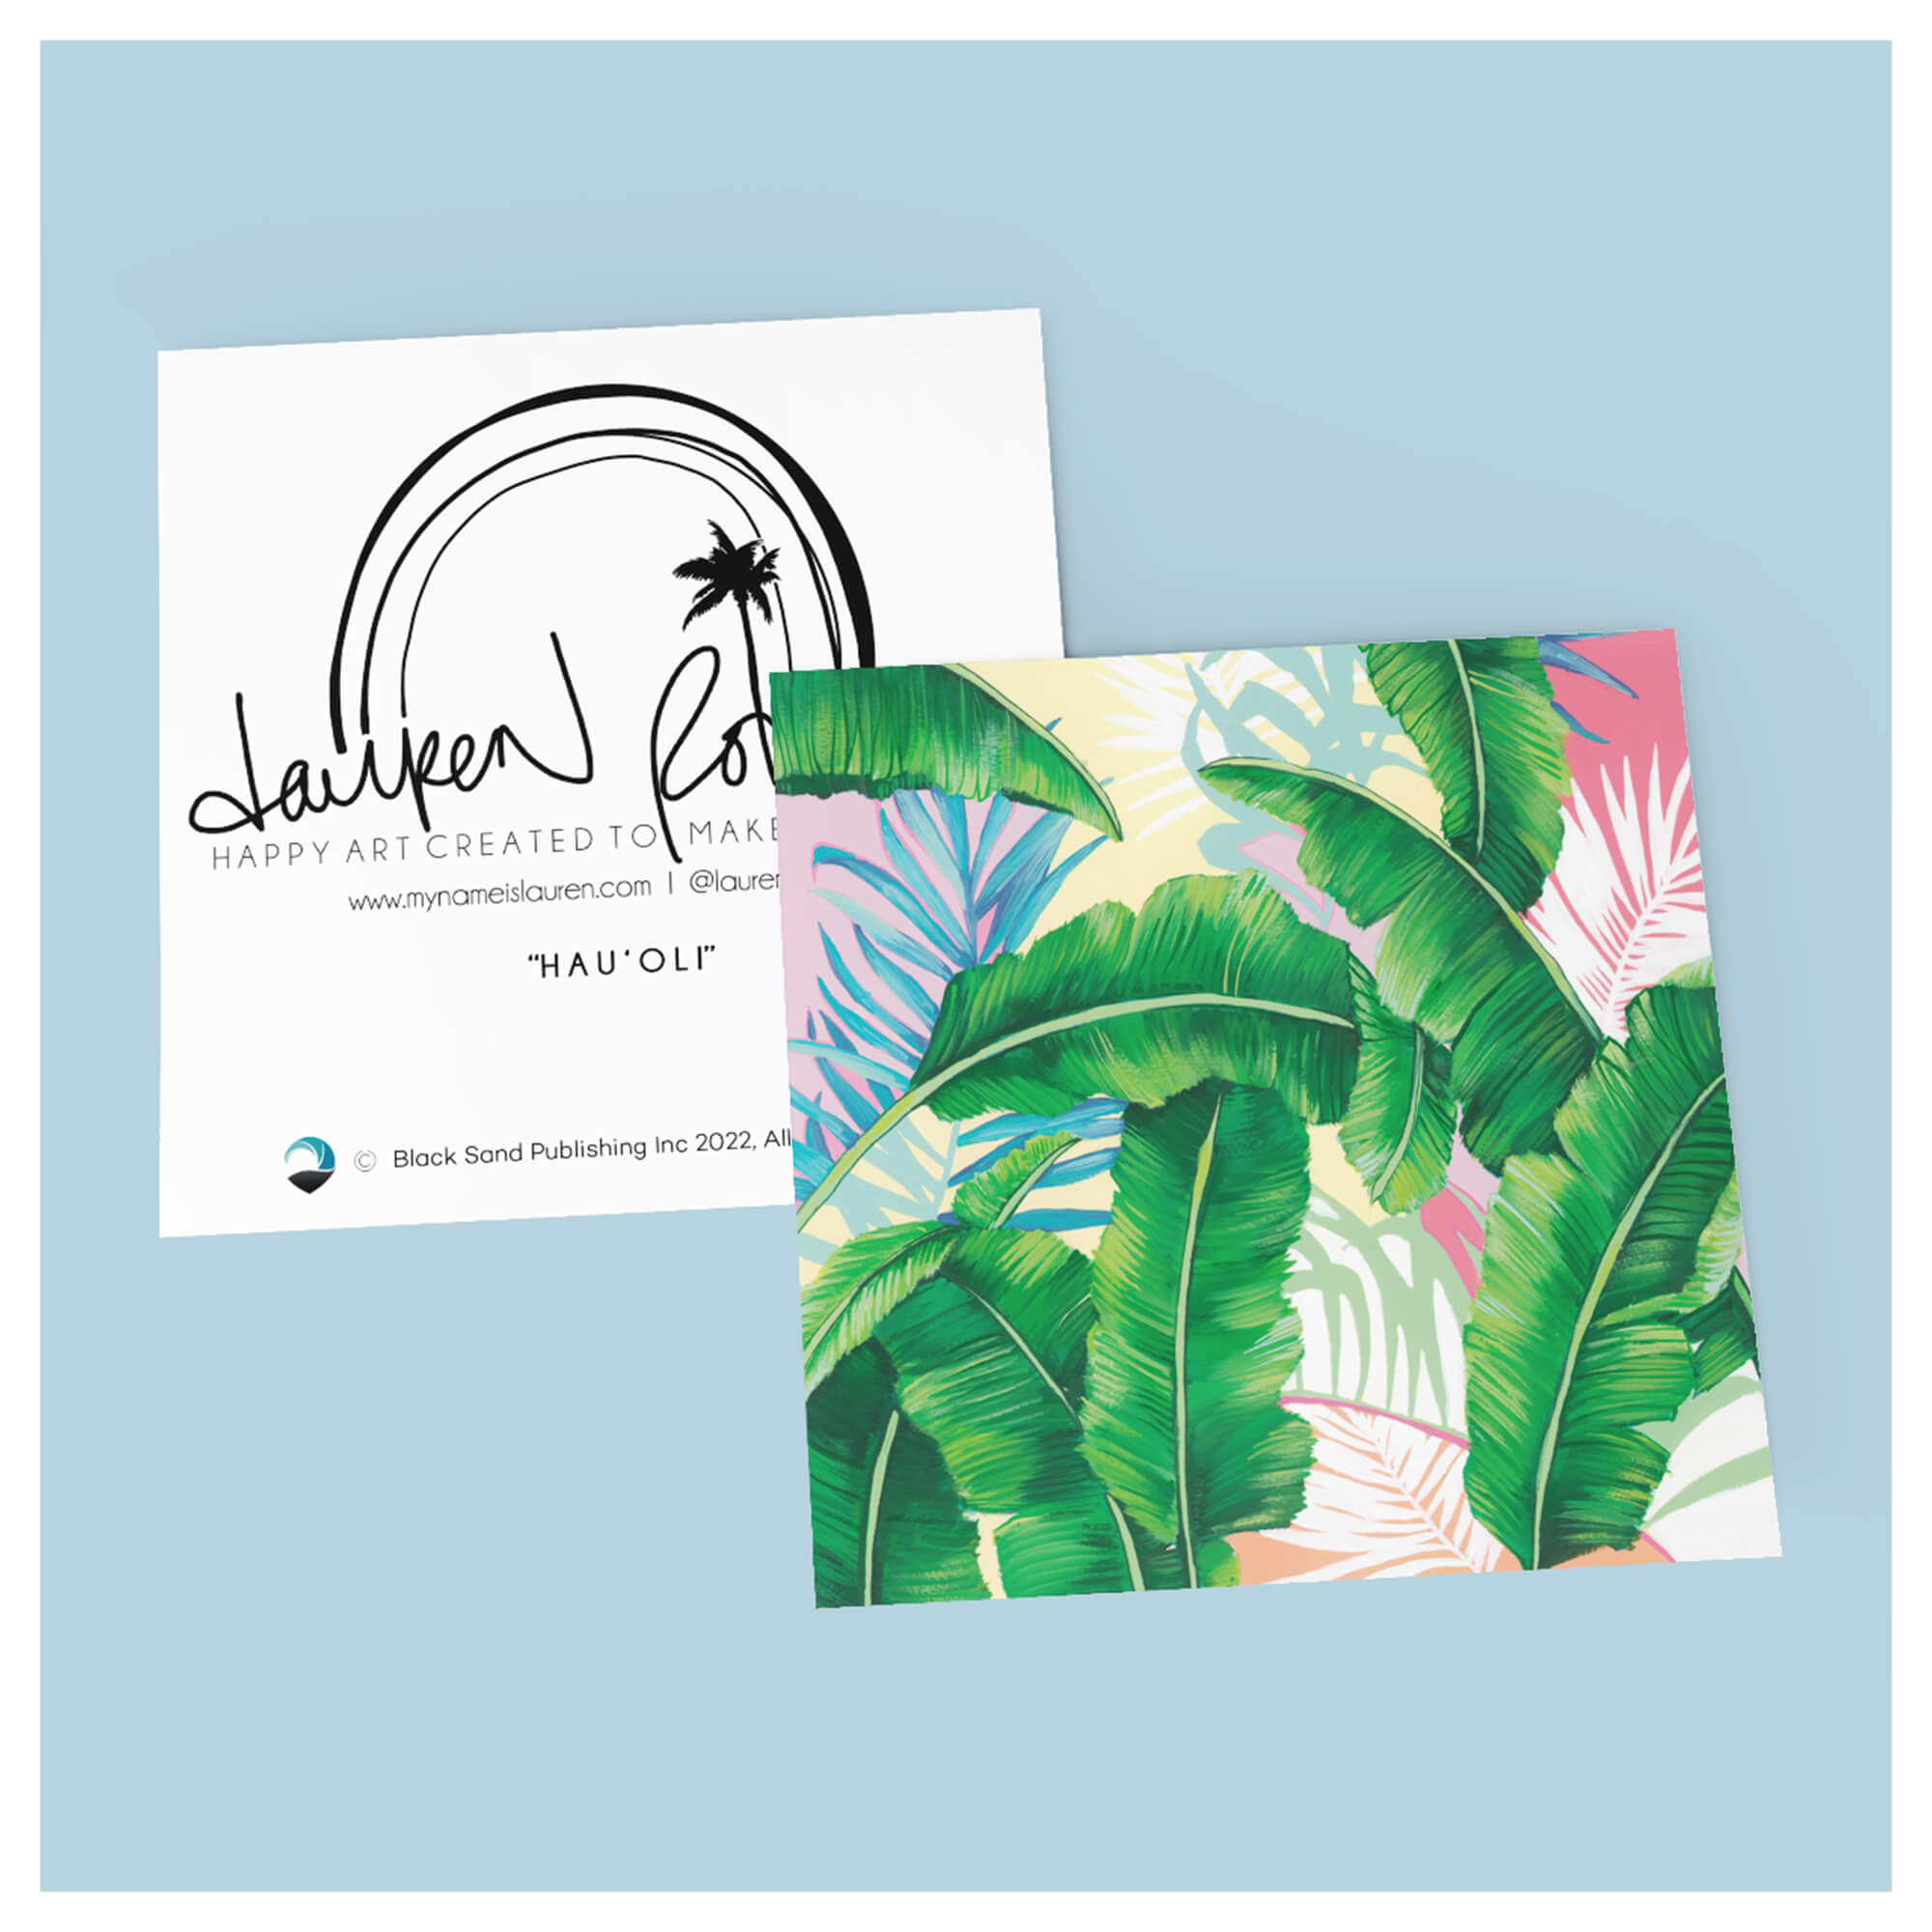 A greeting card that features beautifully painted banana leaves with colorful tropical flora background by famous Hawaii artist Lauren Roth